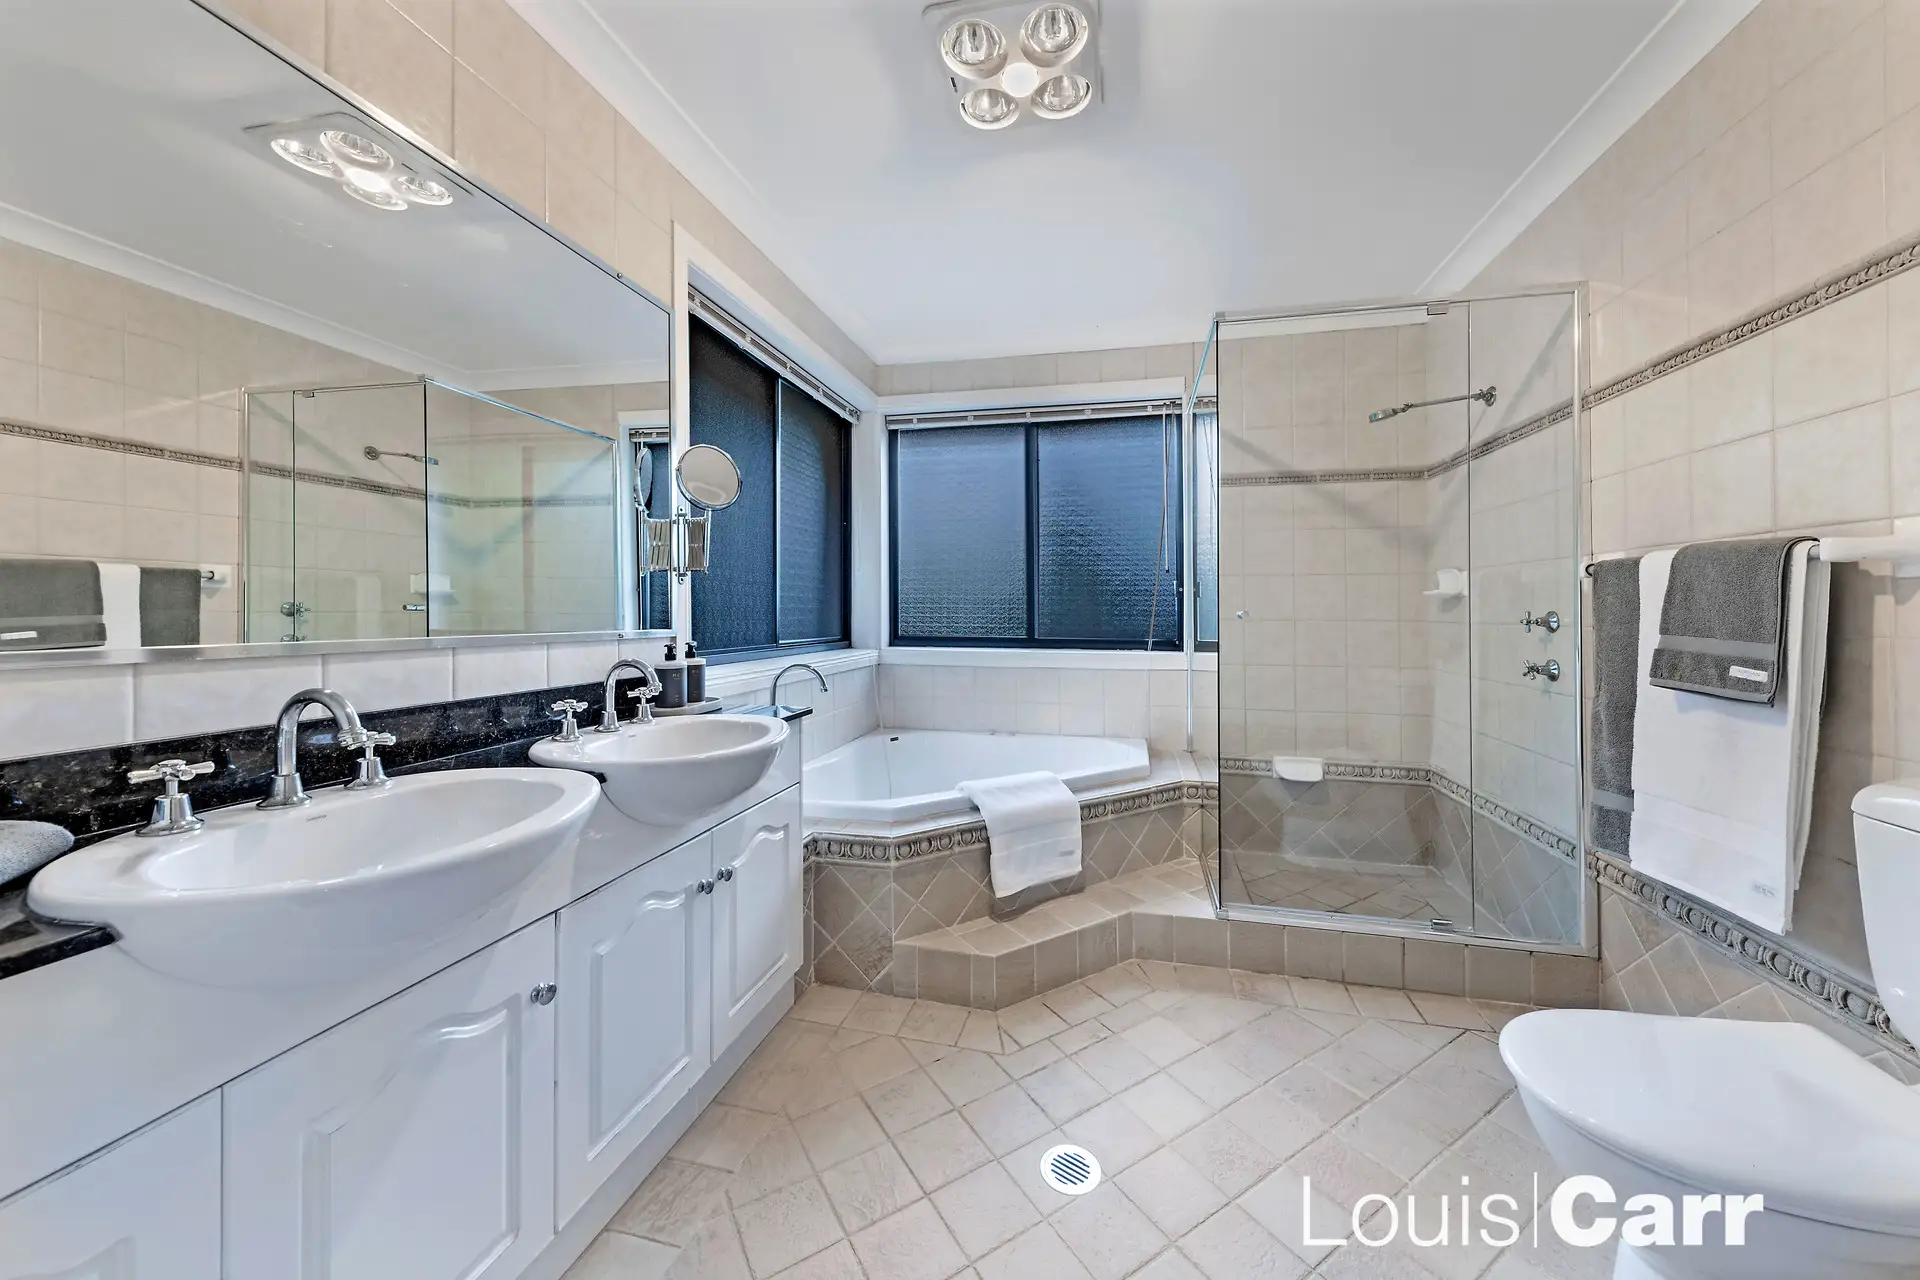 Photo #9: 17 Compton Green, West Pennant Hills - Sold by Louis Carr Real Estate